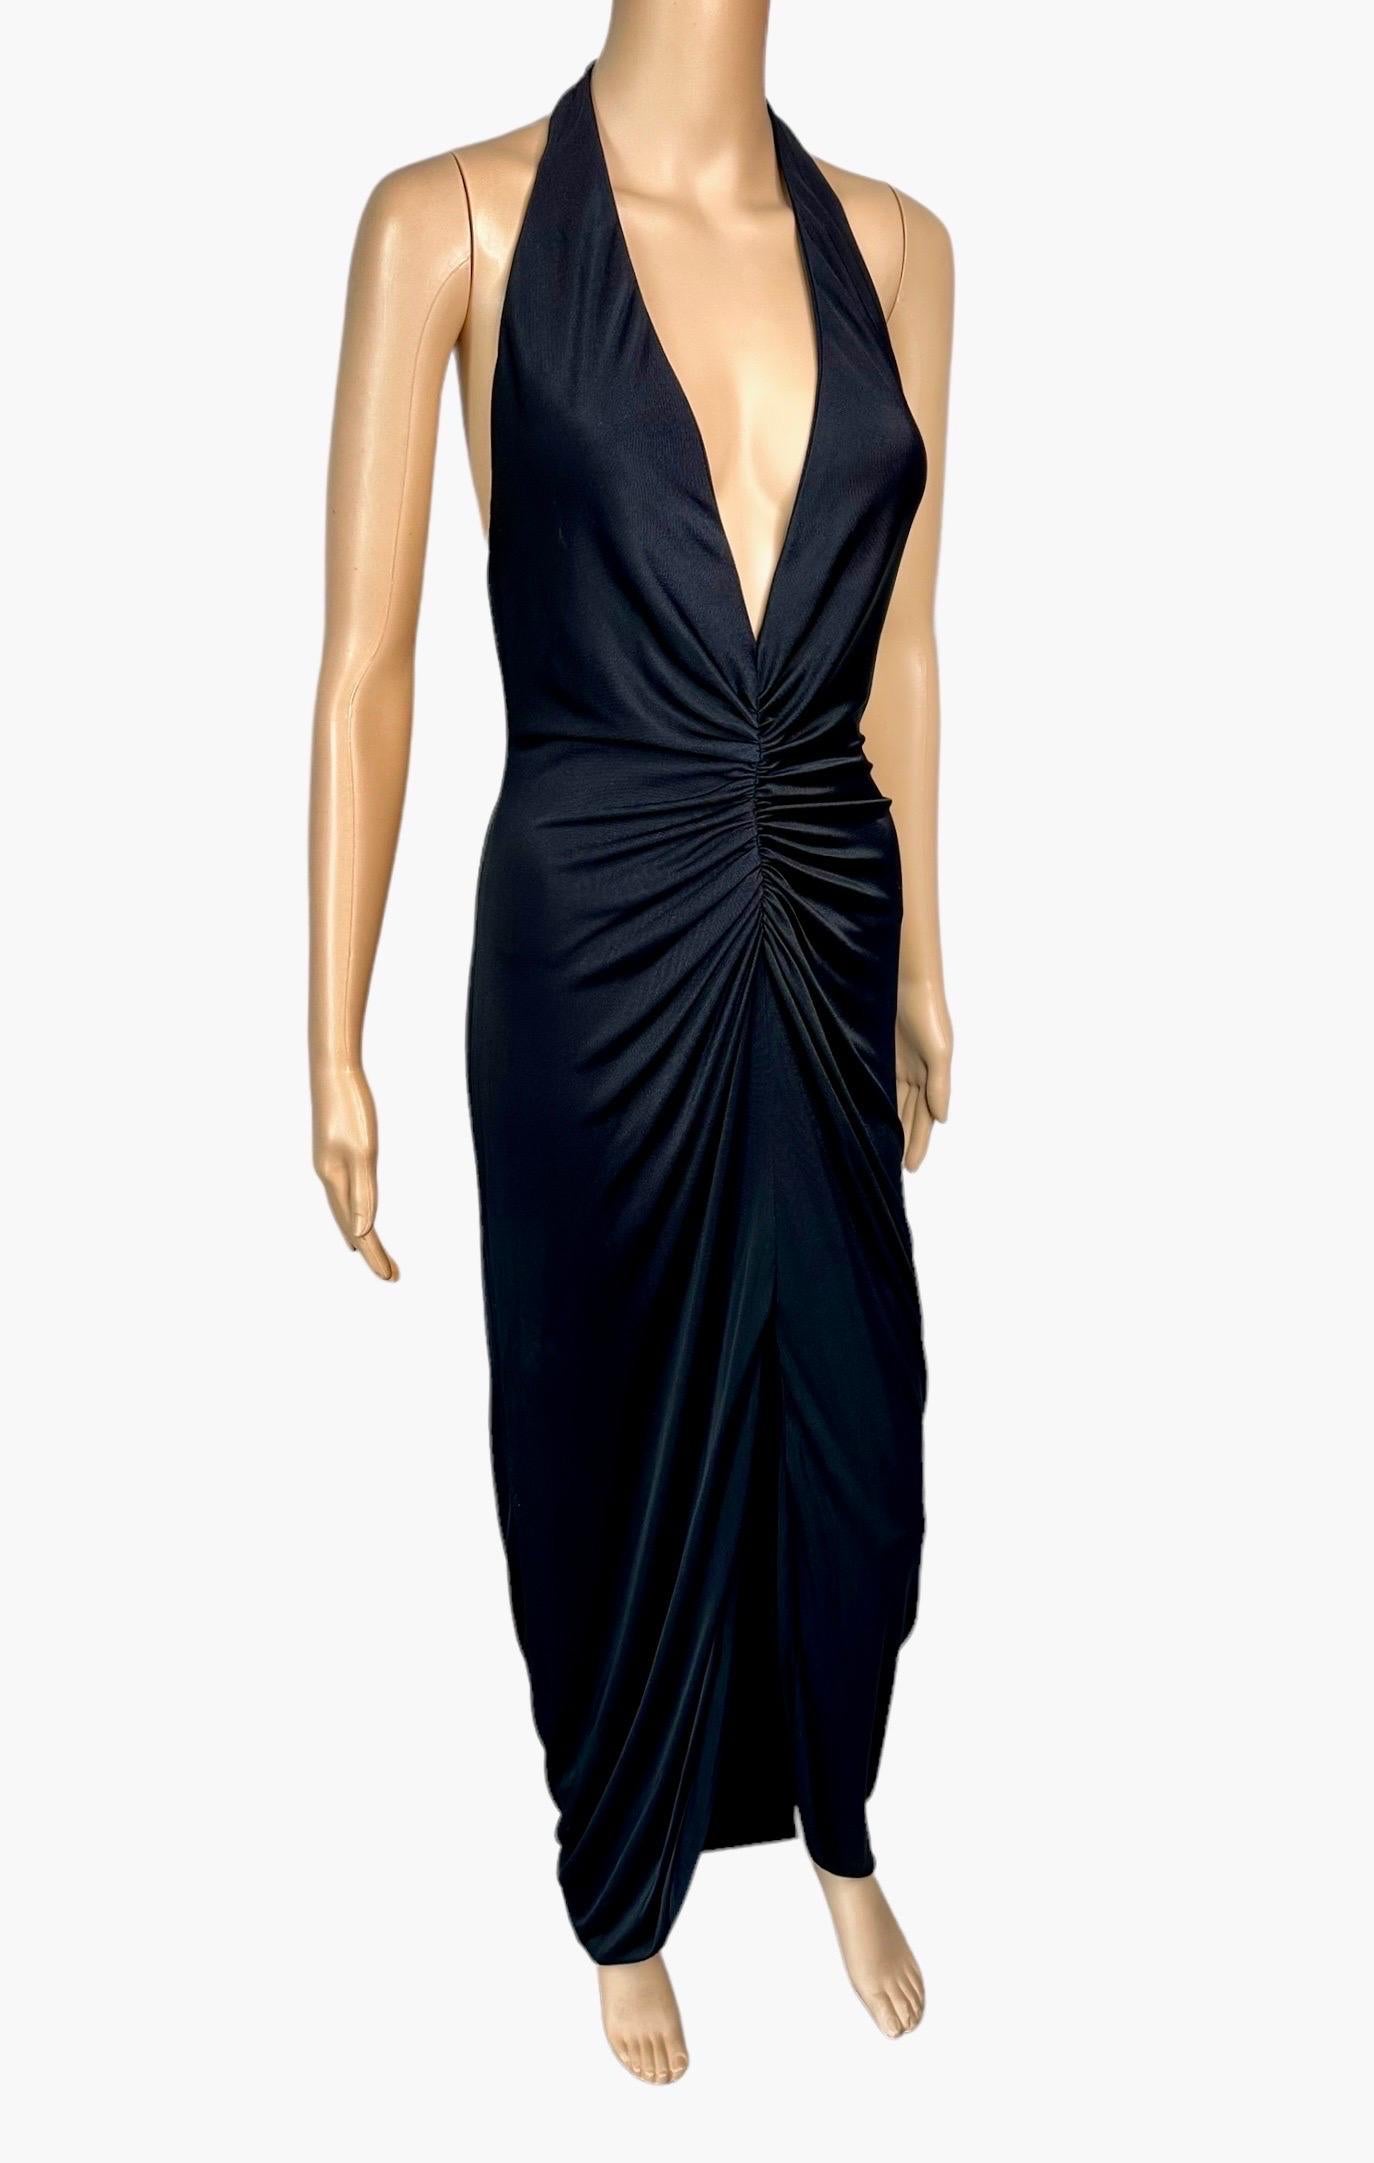 Versace S/S 2005 Runway Plunging Hi-Low Ruched Open Back Evening Dress Gown 1